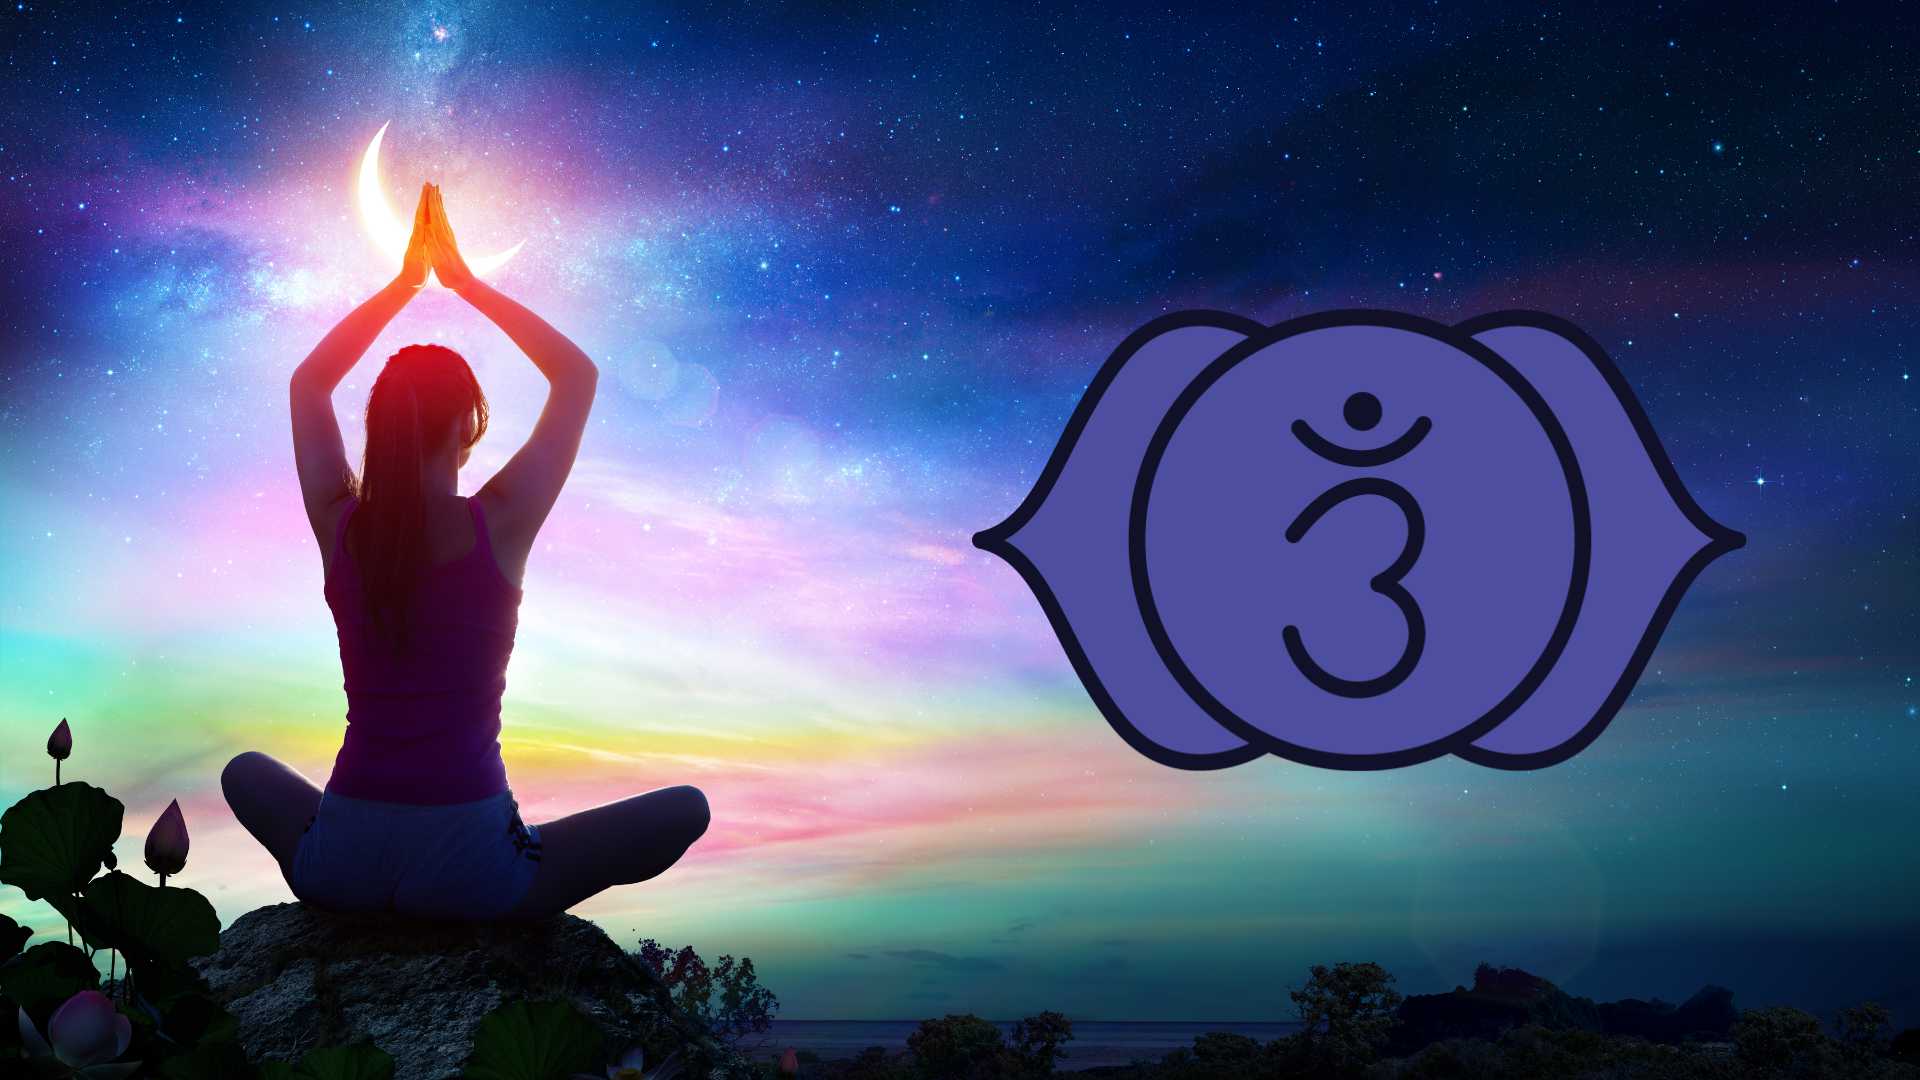 How to open your third eye - Opening your third eye with Yoga